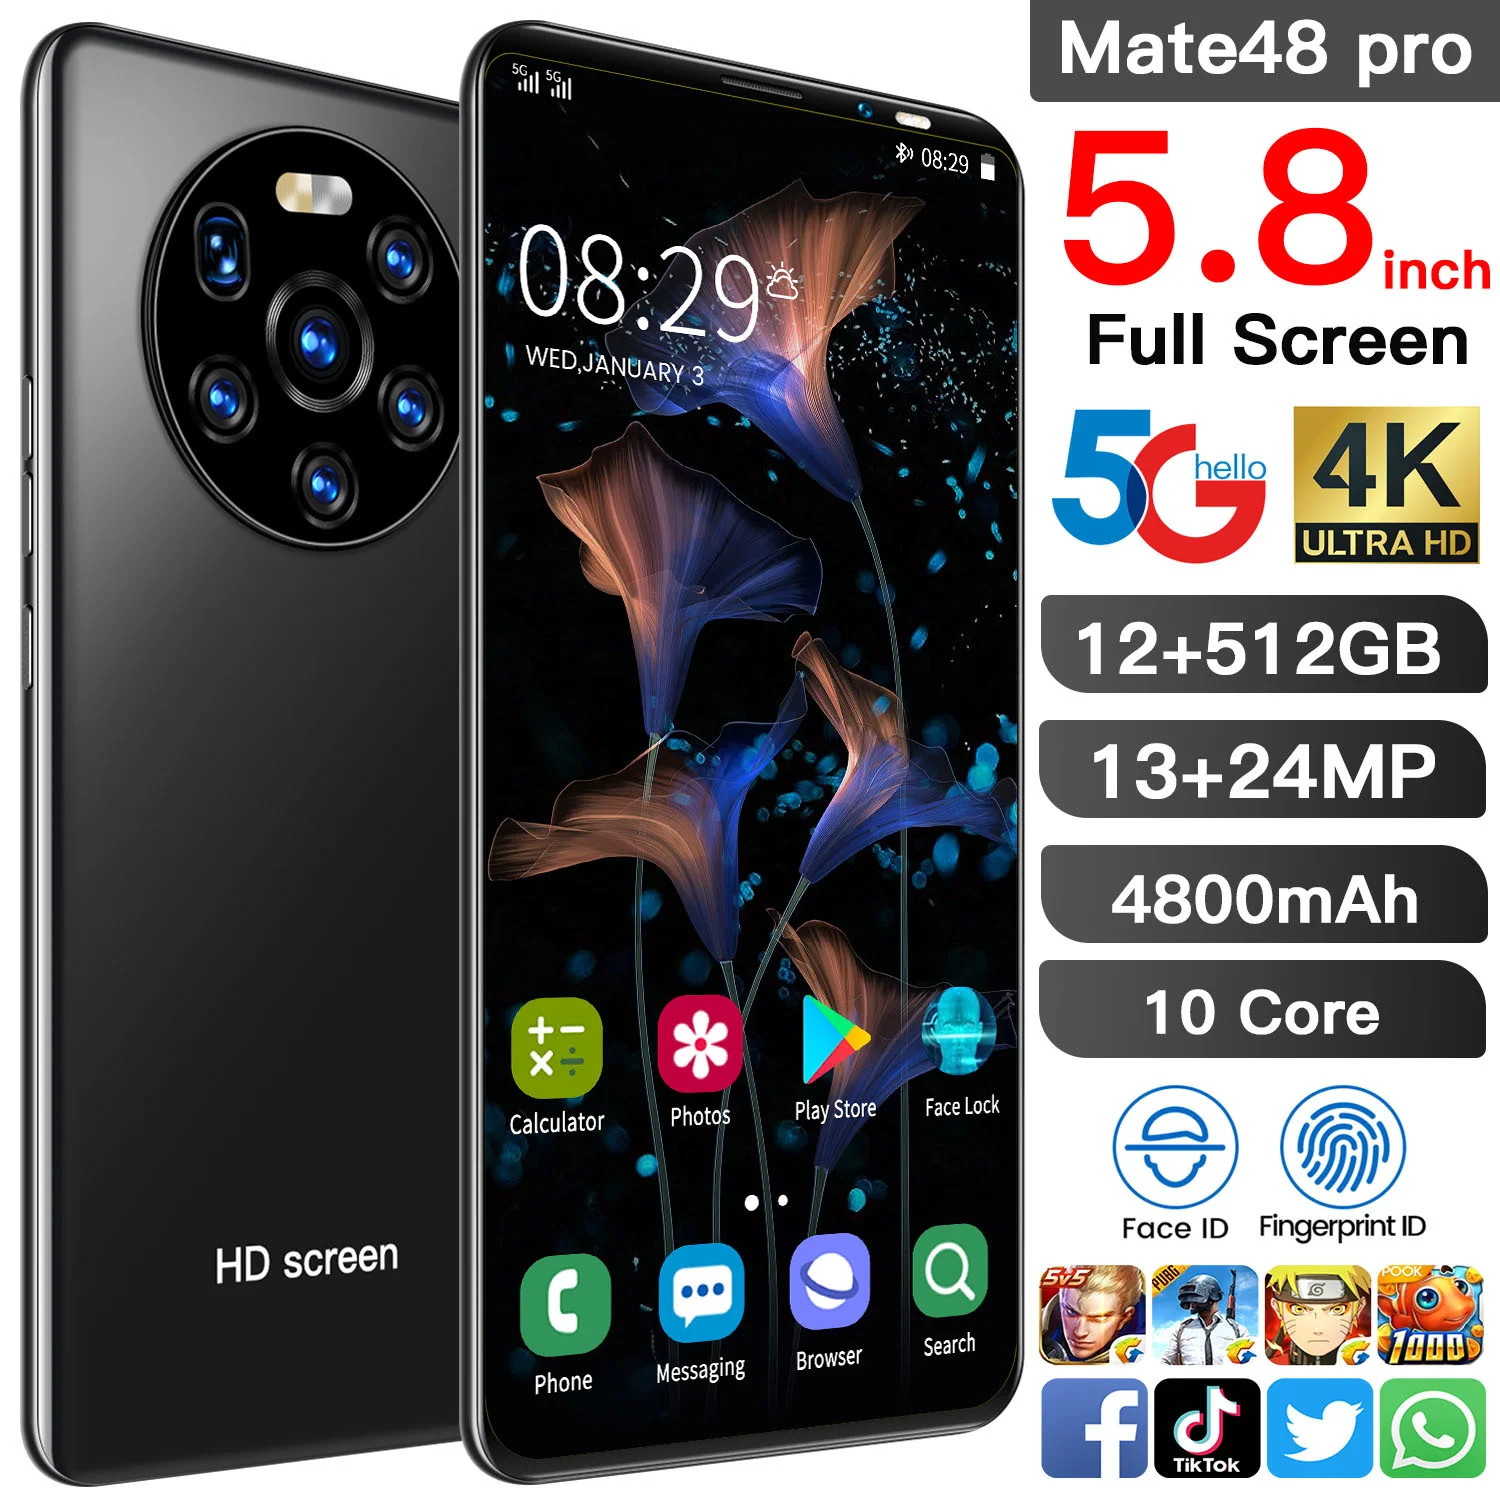 High-end Smart phone Mate 48 Pro unlocked cell Global Version phone 5g Network Smartphone Android 10.0 Deca Core Mobile Phones